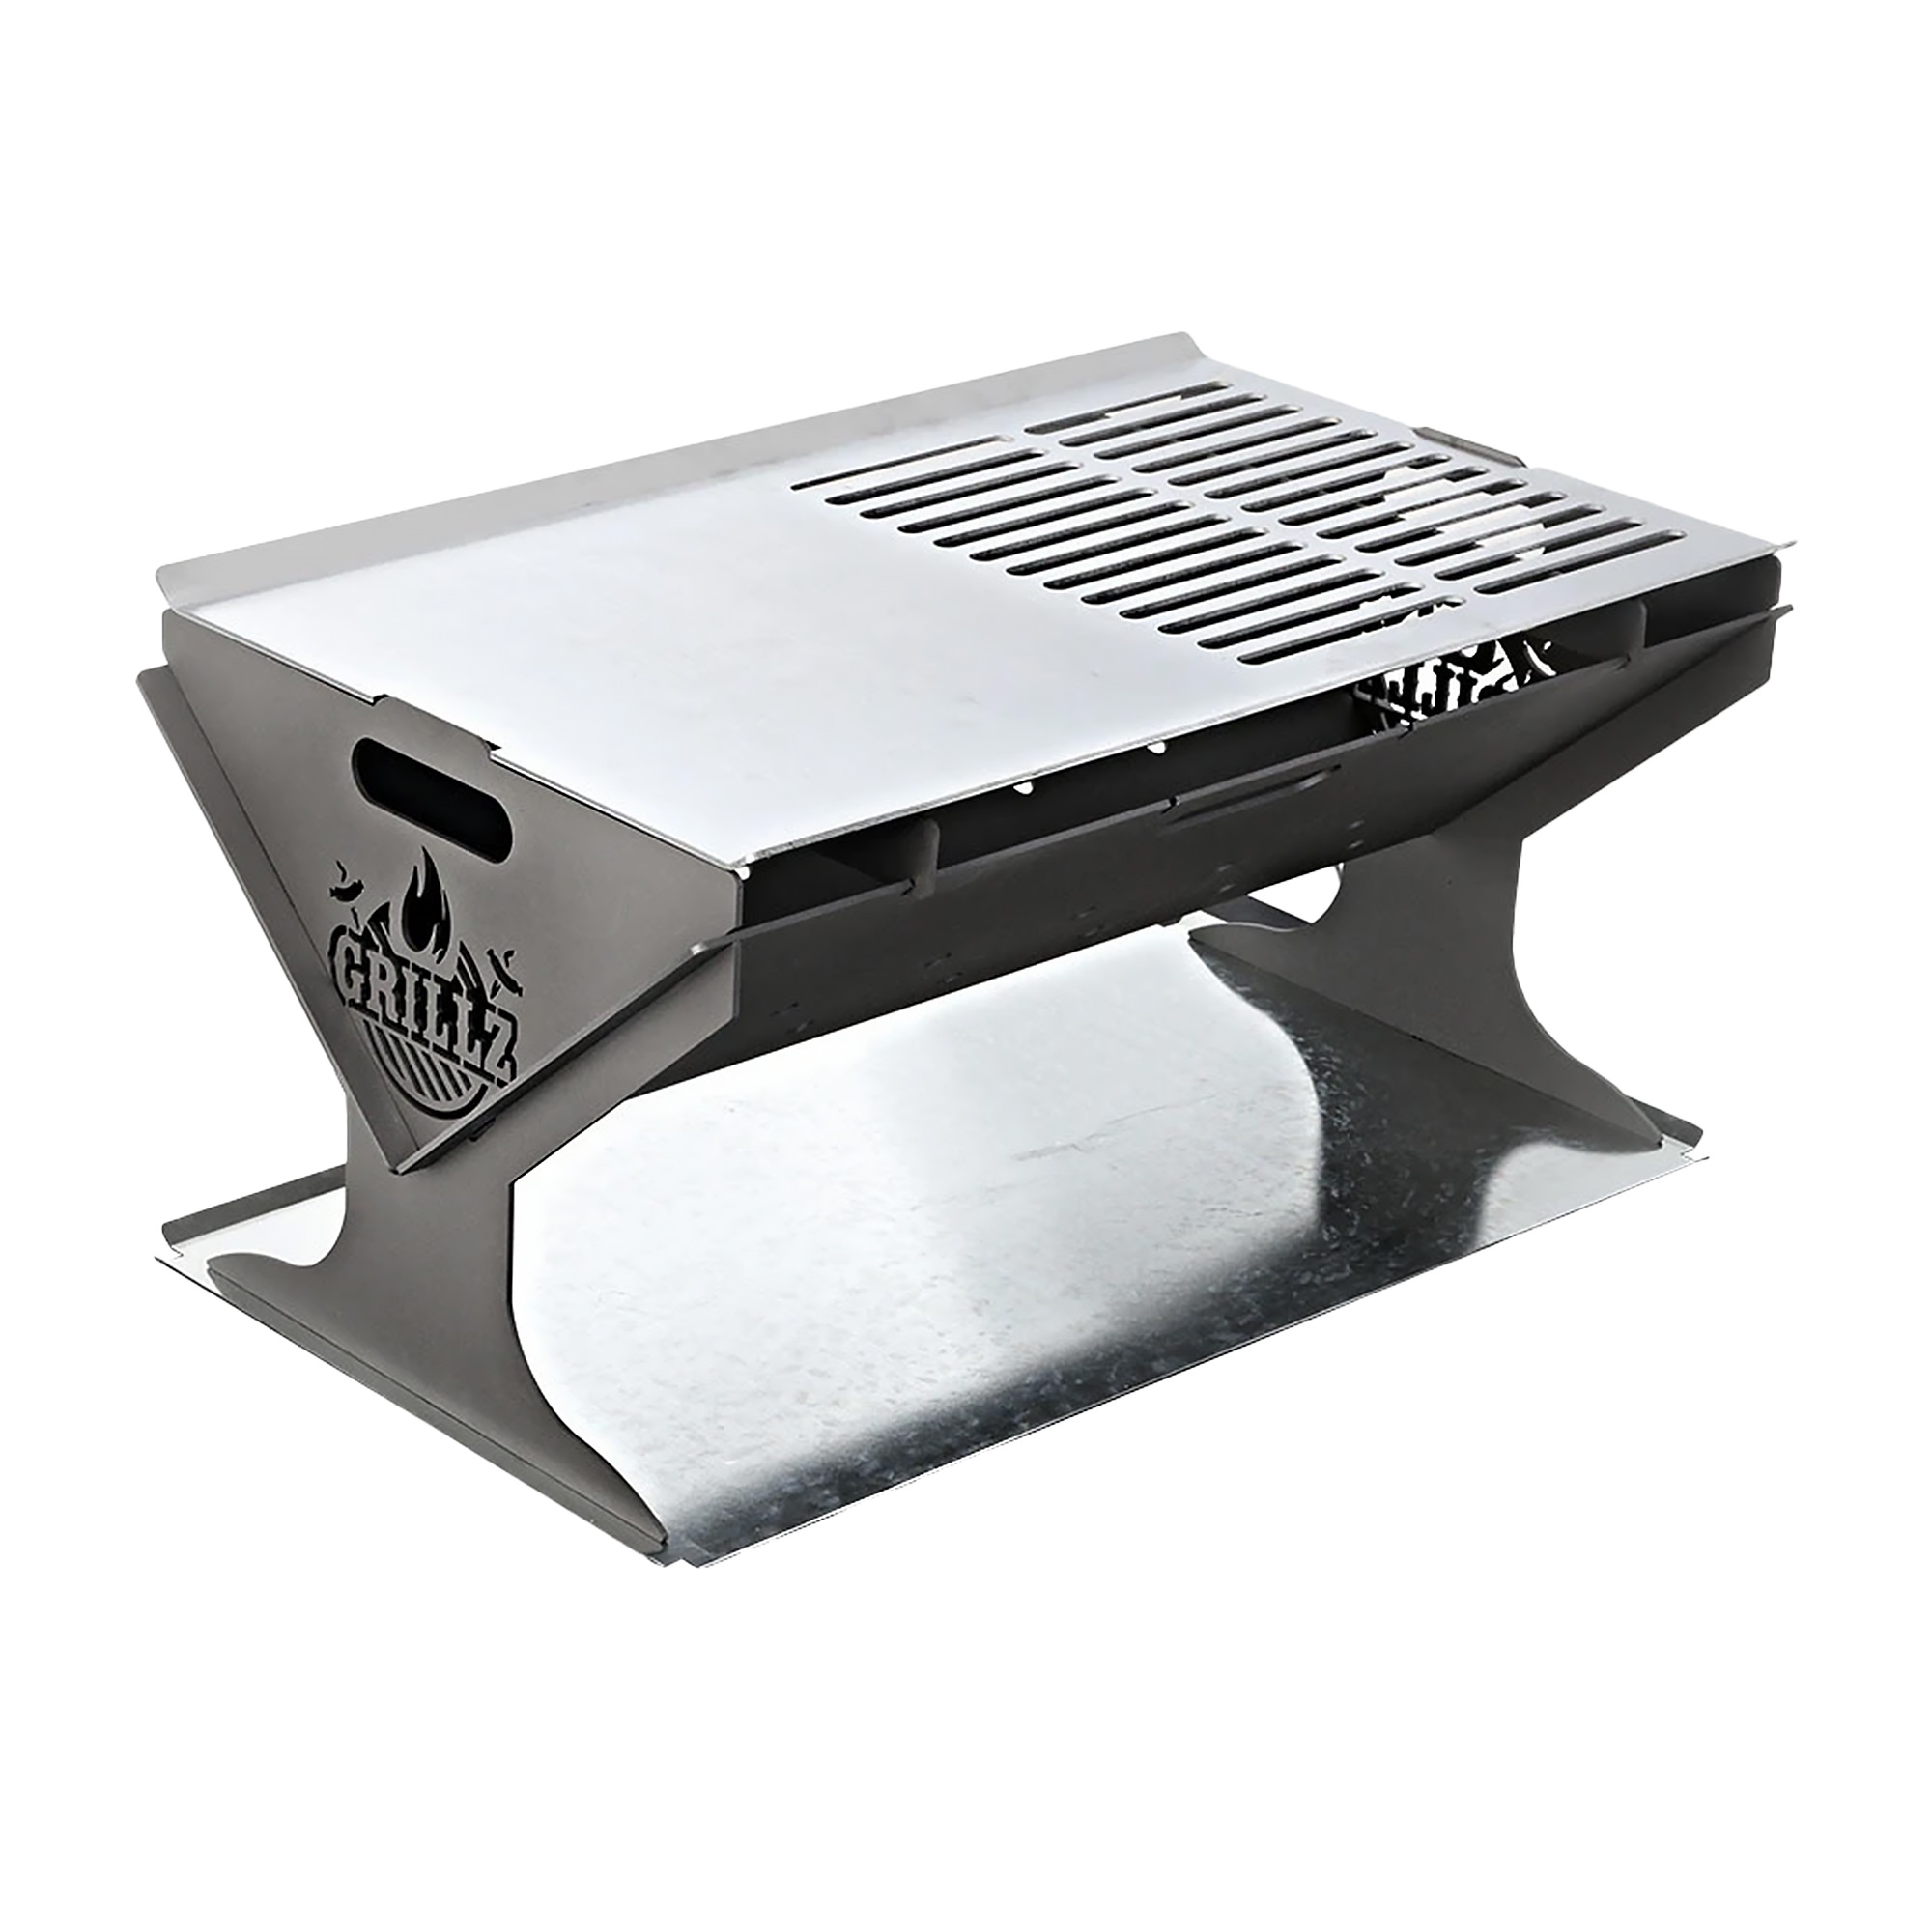 Grillz Stainless Steel Portable Fire Pit and BBQ Image 1